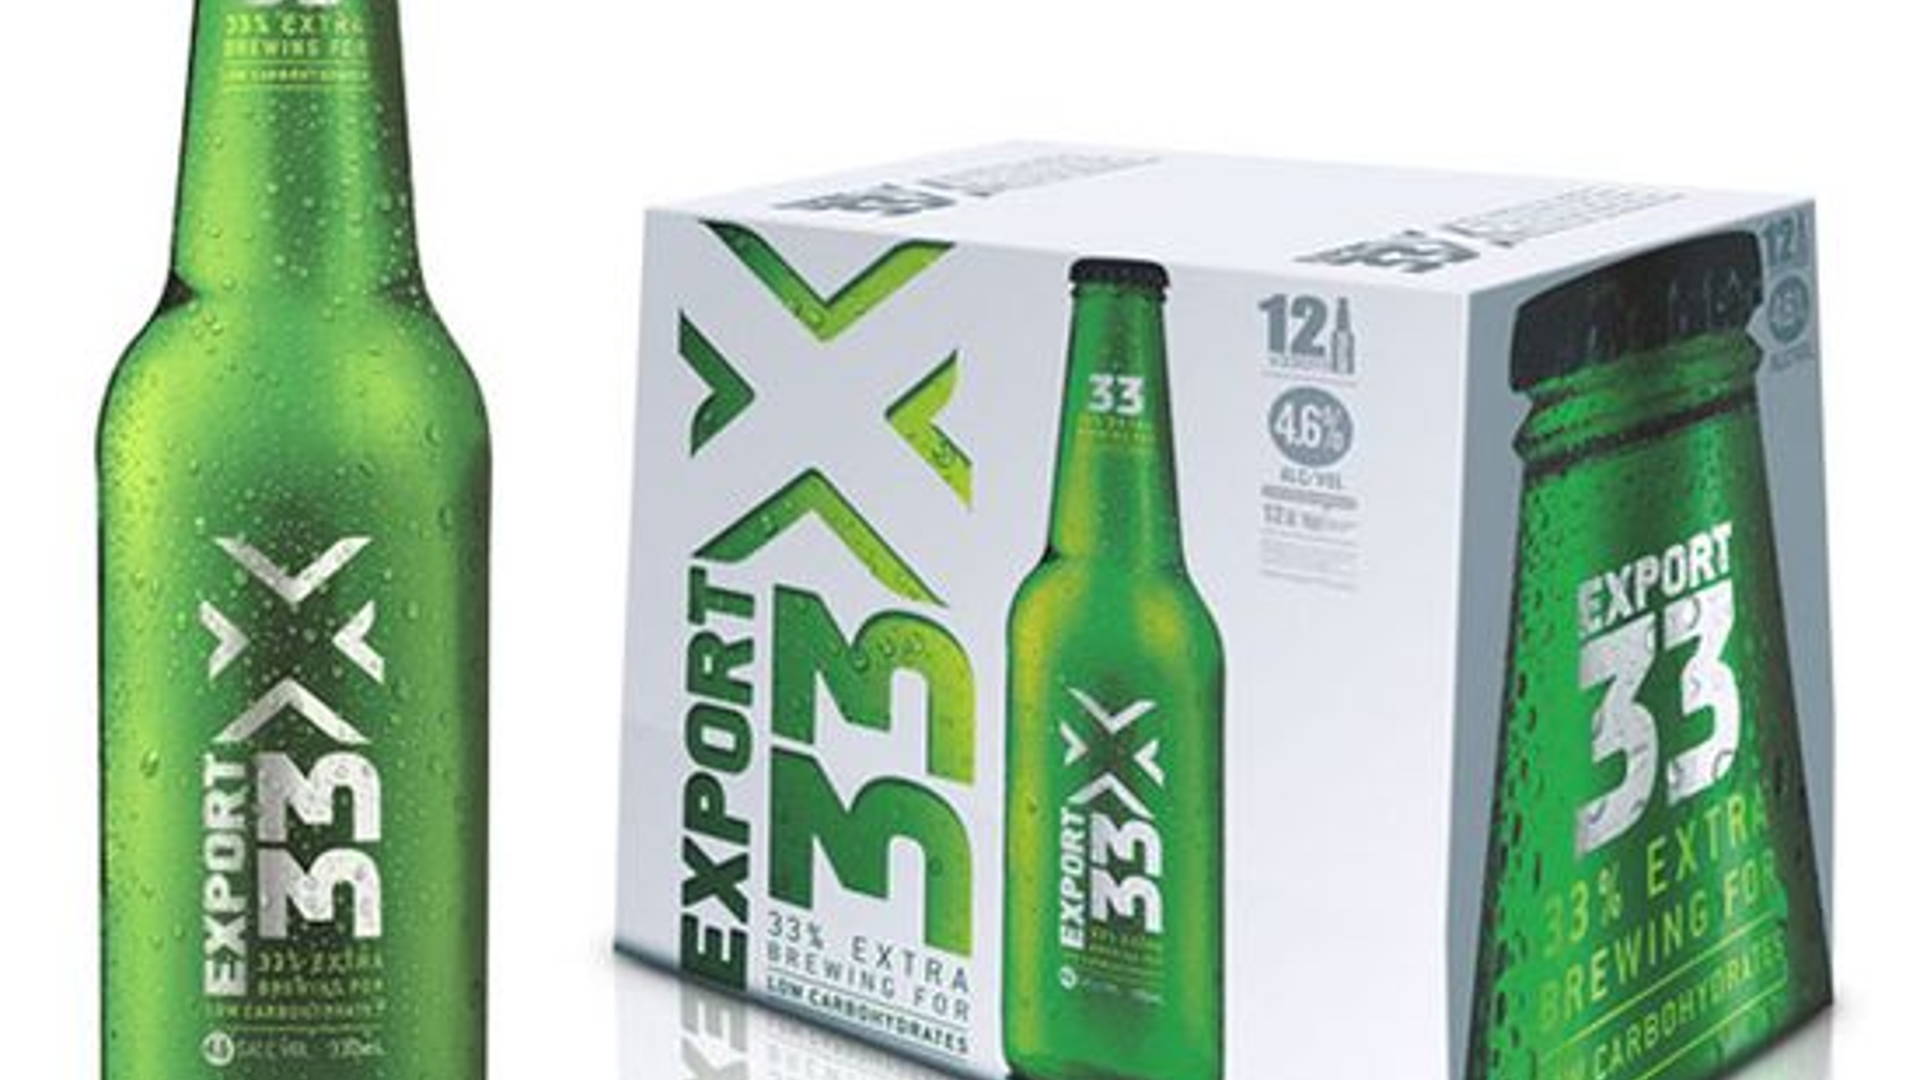 Featured image for Export 33 Beer